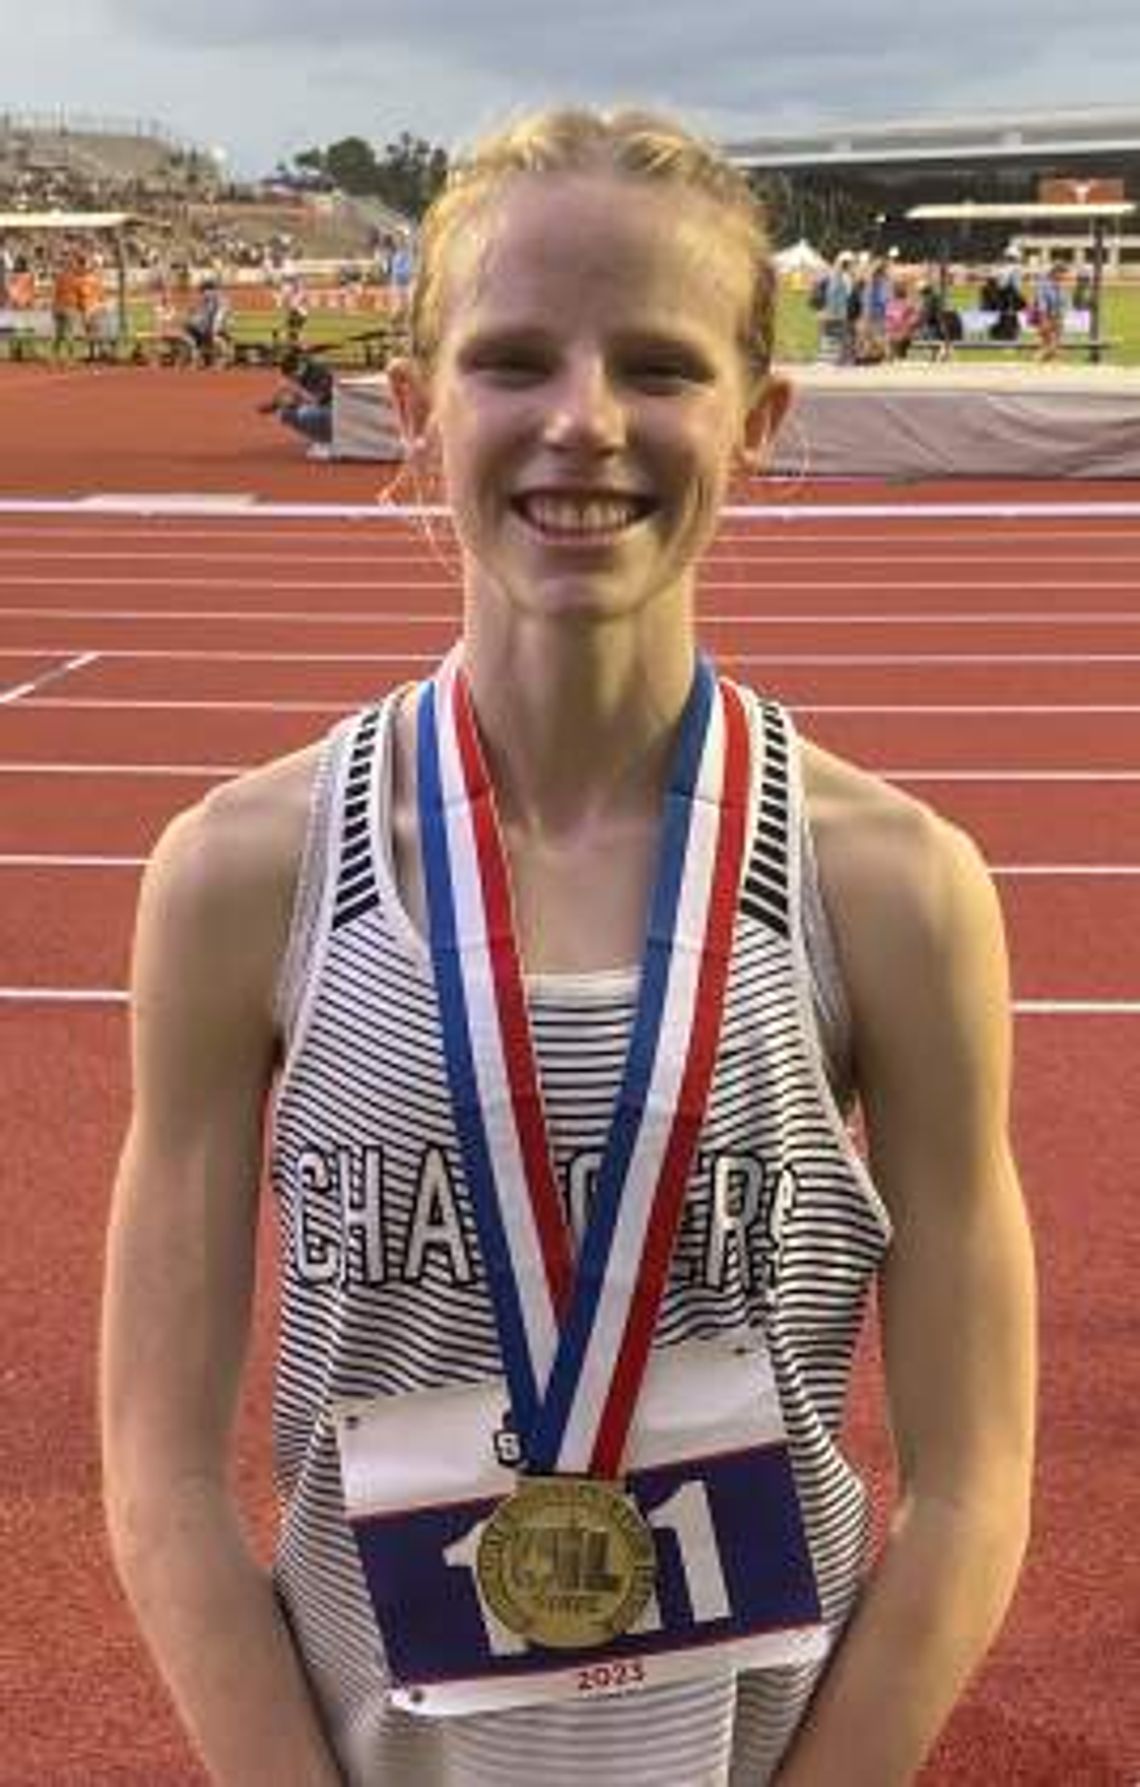 Boerne area athletes shine at various state meets